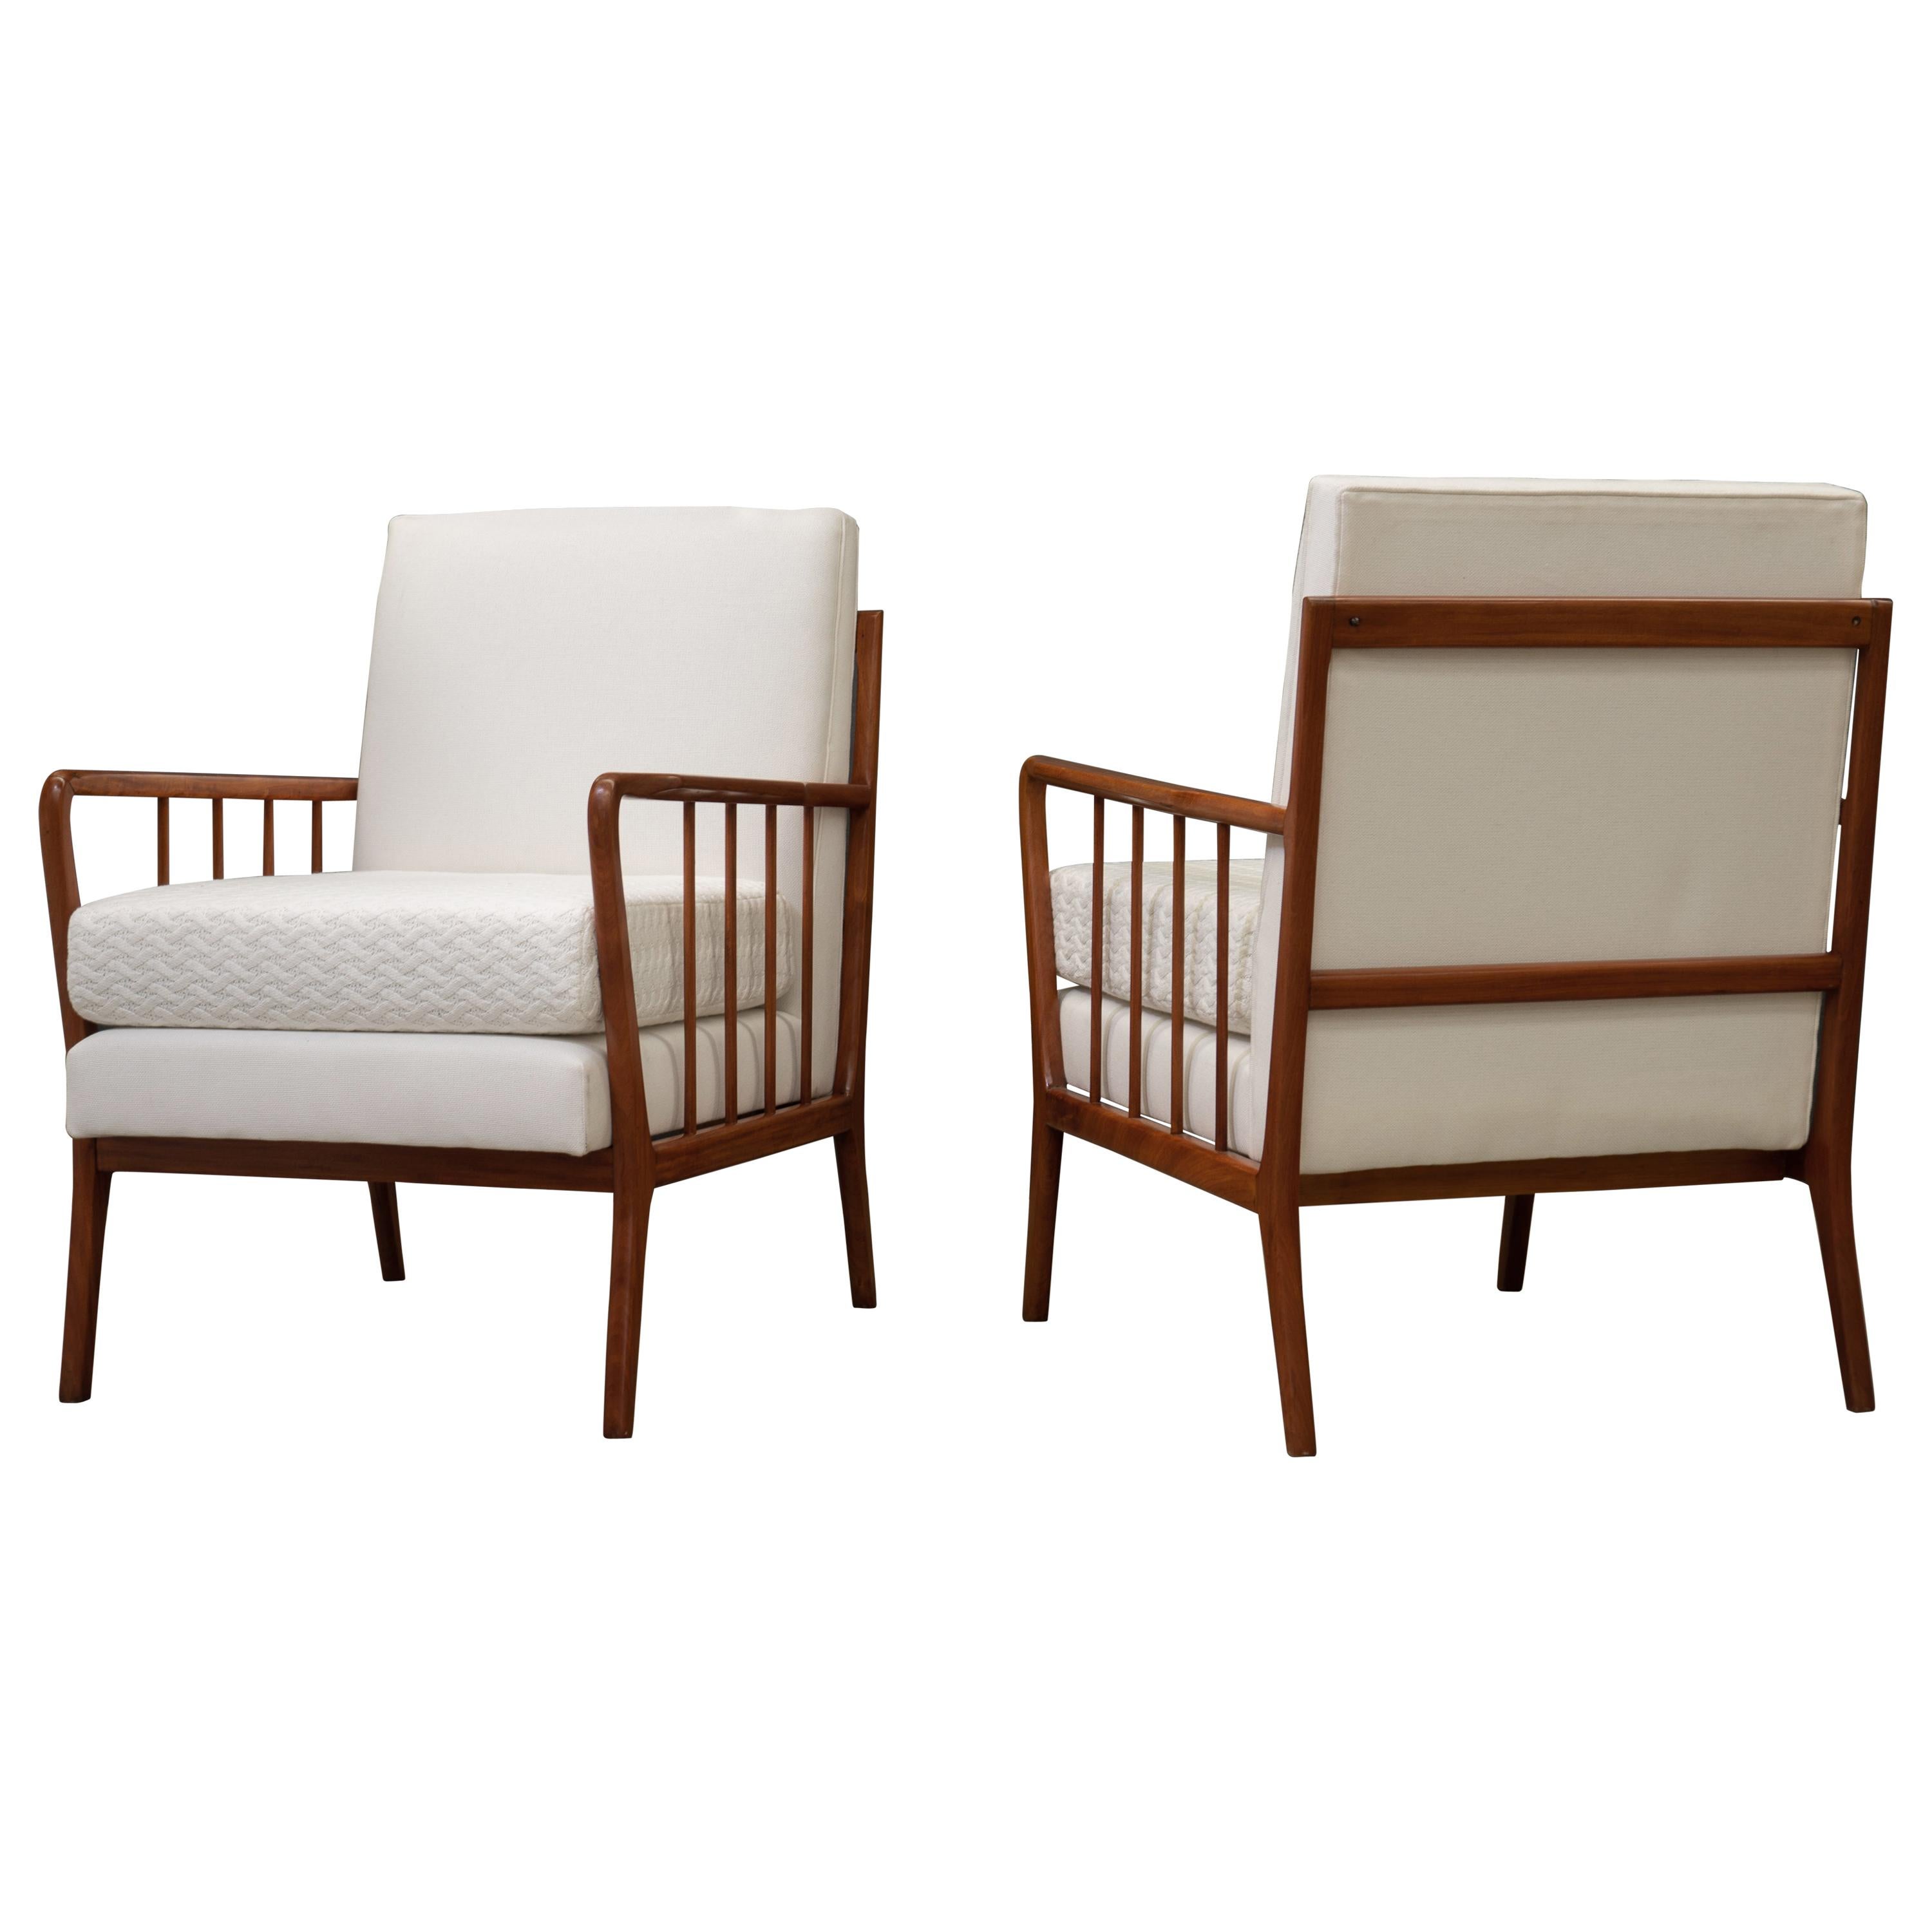 Pair of Armchairs by Rino Levi, Brazilian MidCentury Design For Sale